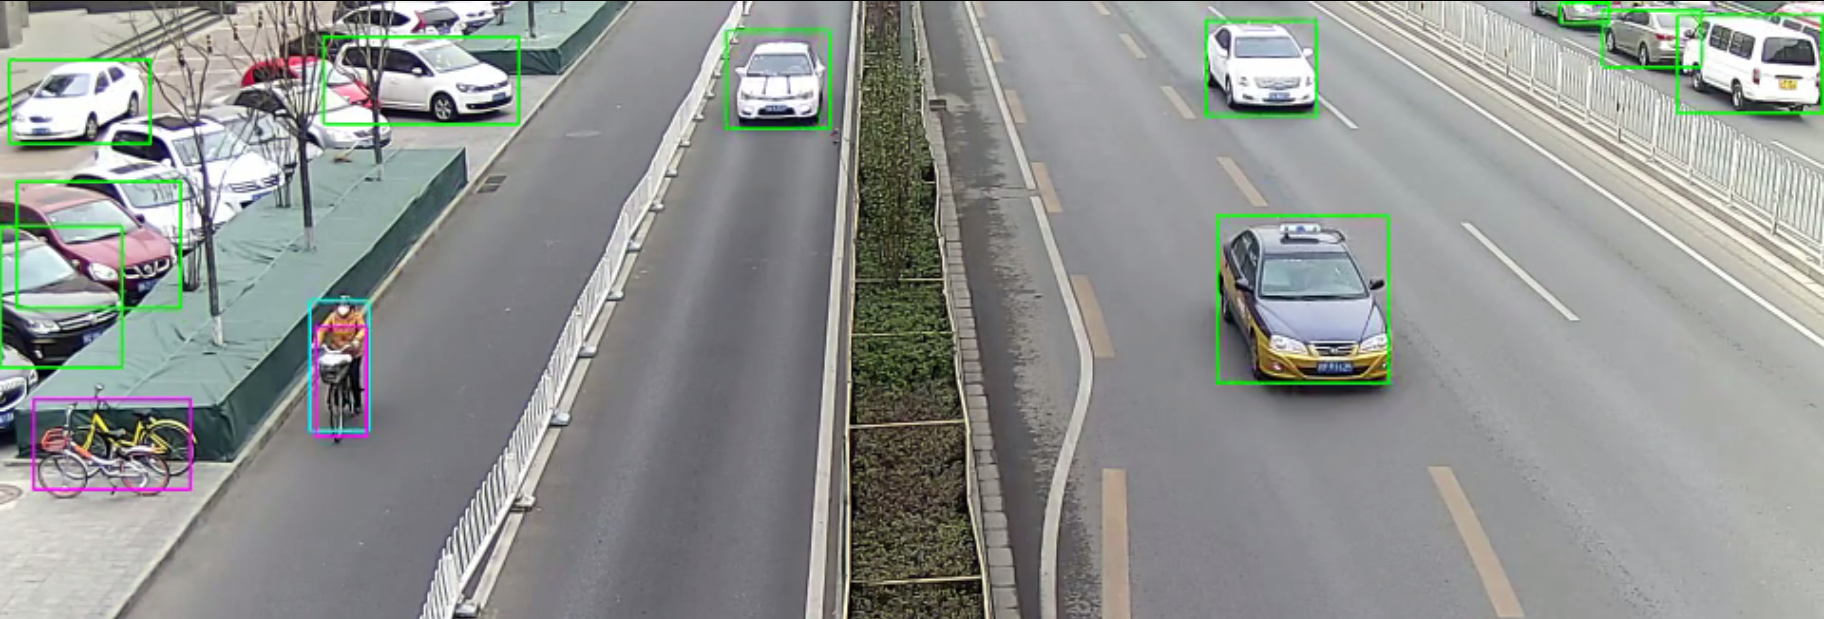 person-vehicle-bike-detection-crossroad-1016.png